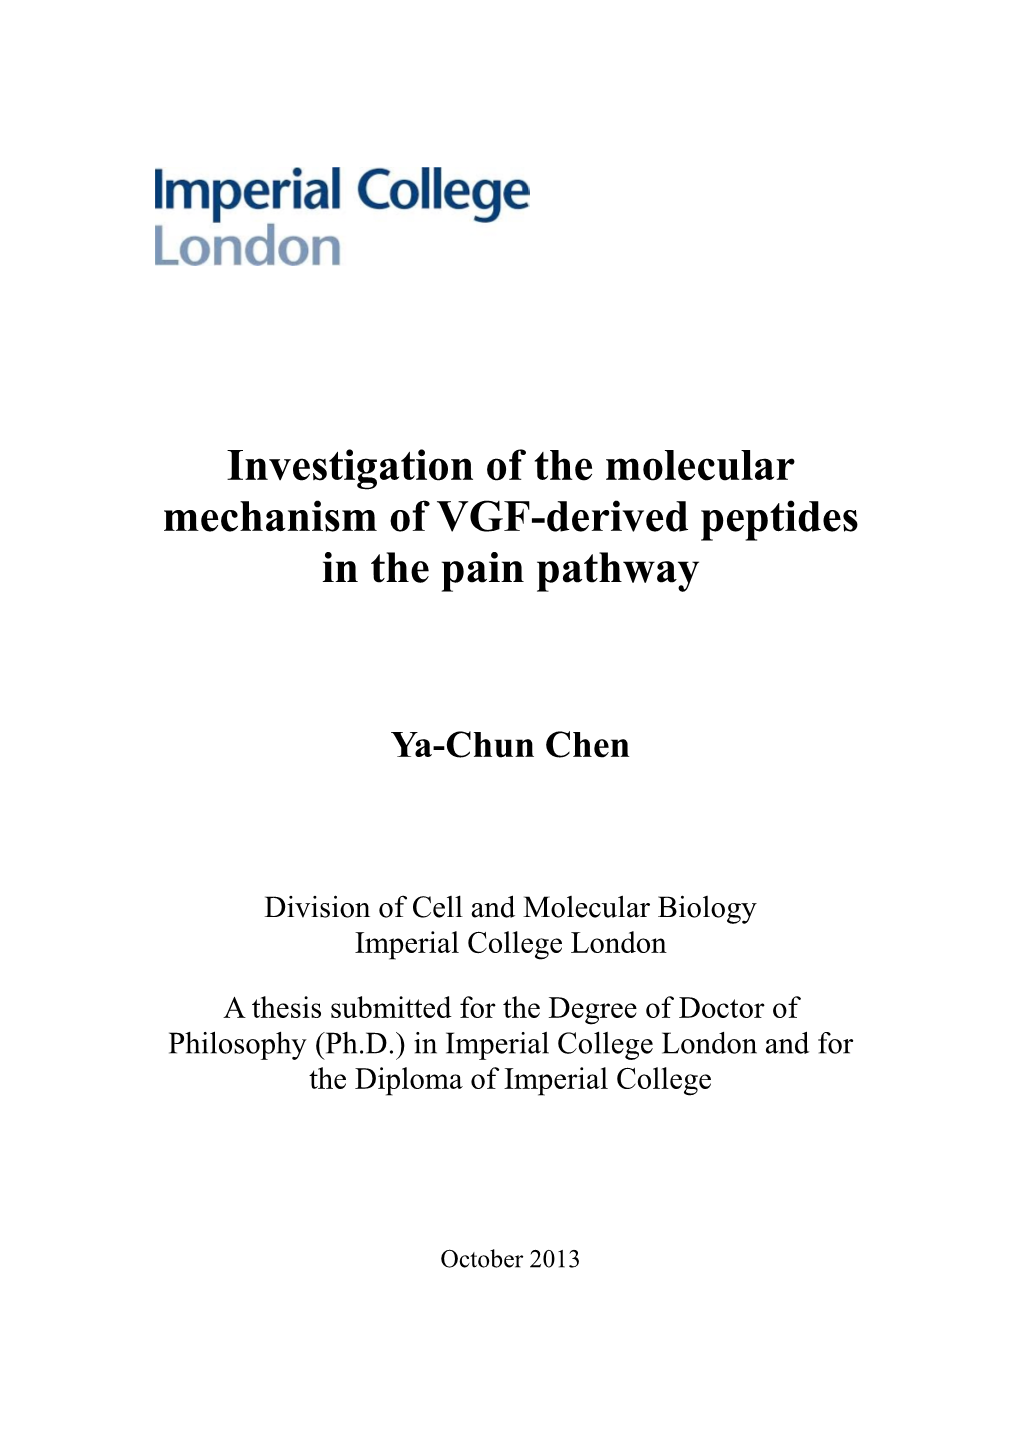 Investigation of the Molecular Mechanism of VGF-Derived Peptides in the Pain Pathway